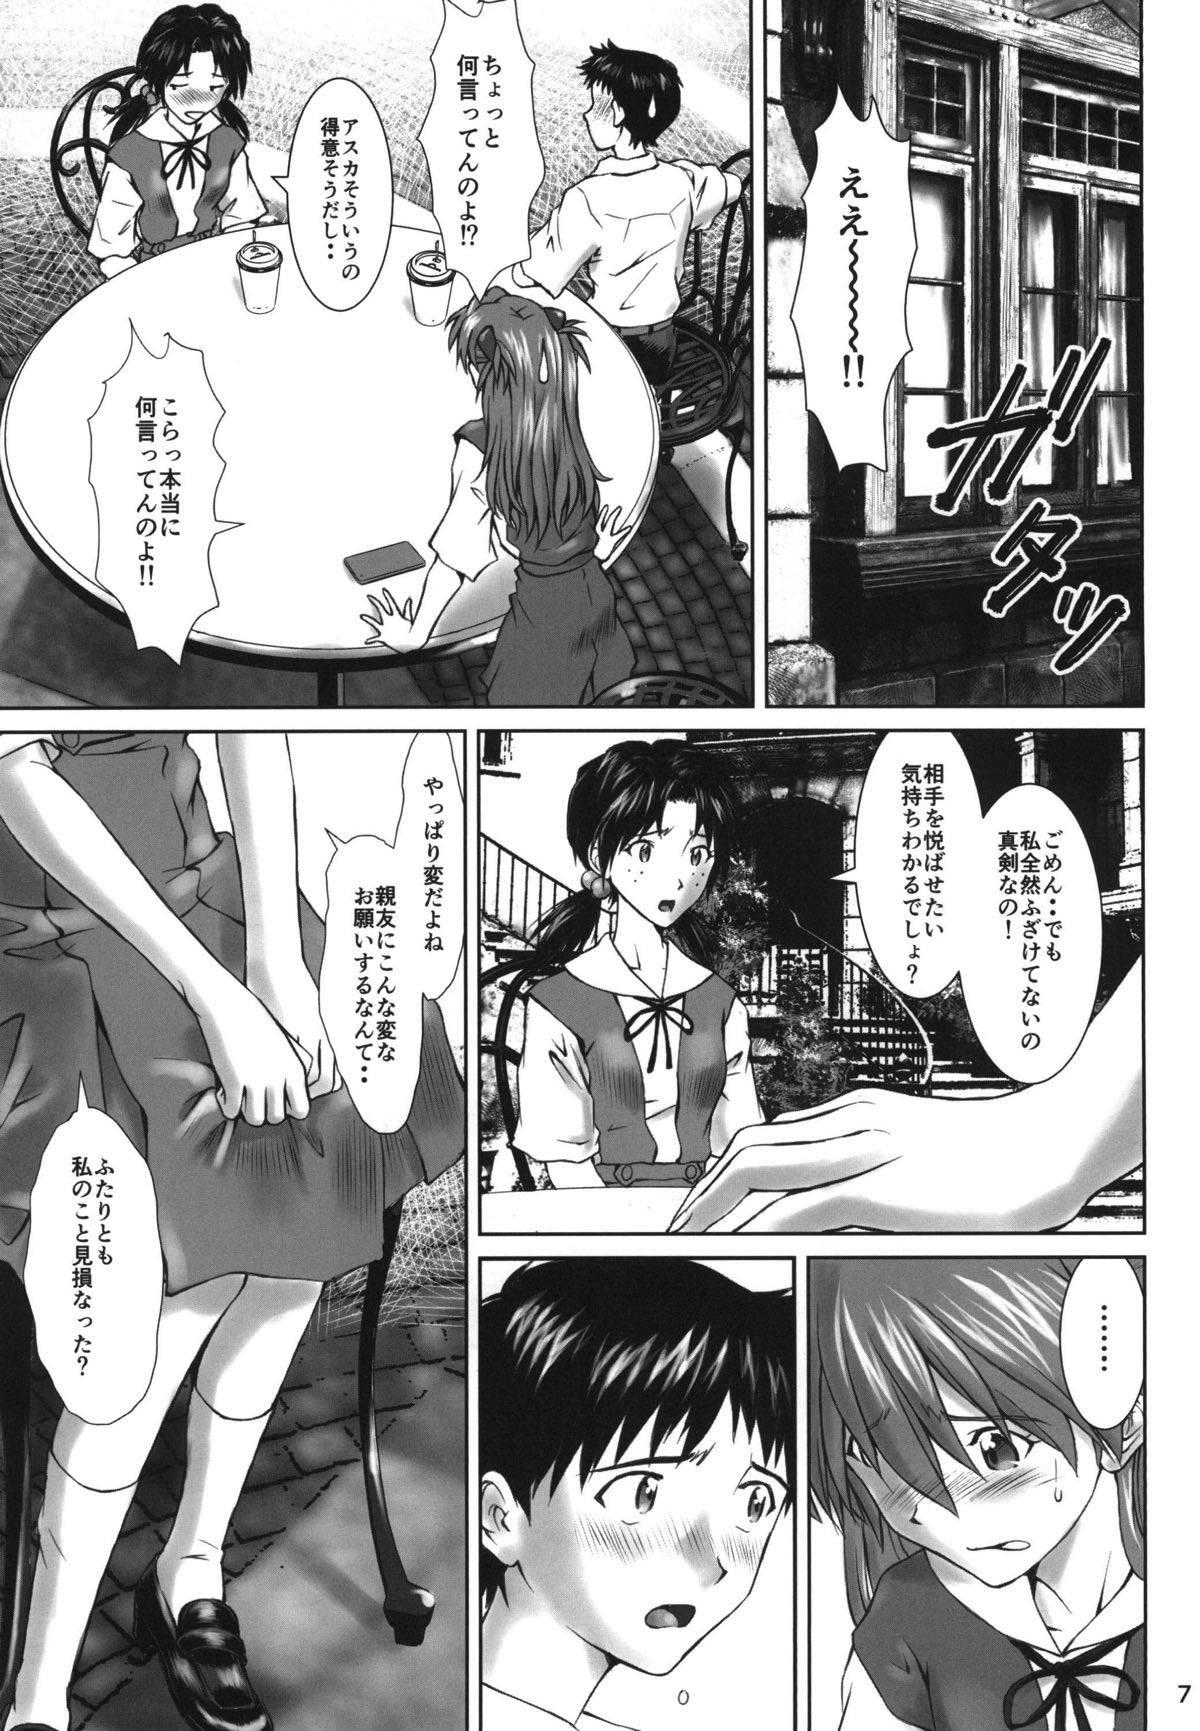 Blackmail Let's share it - Neon genesis evangelion Soles - Page 6